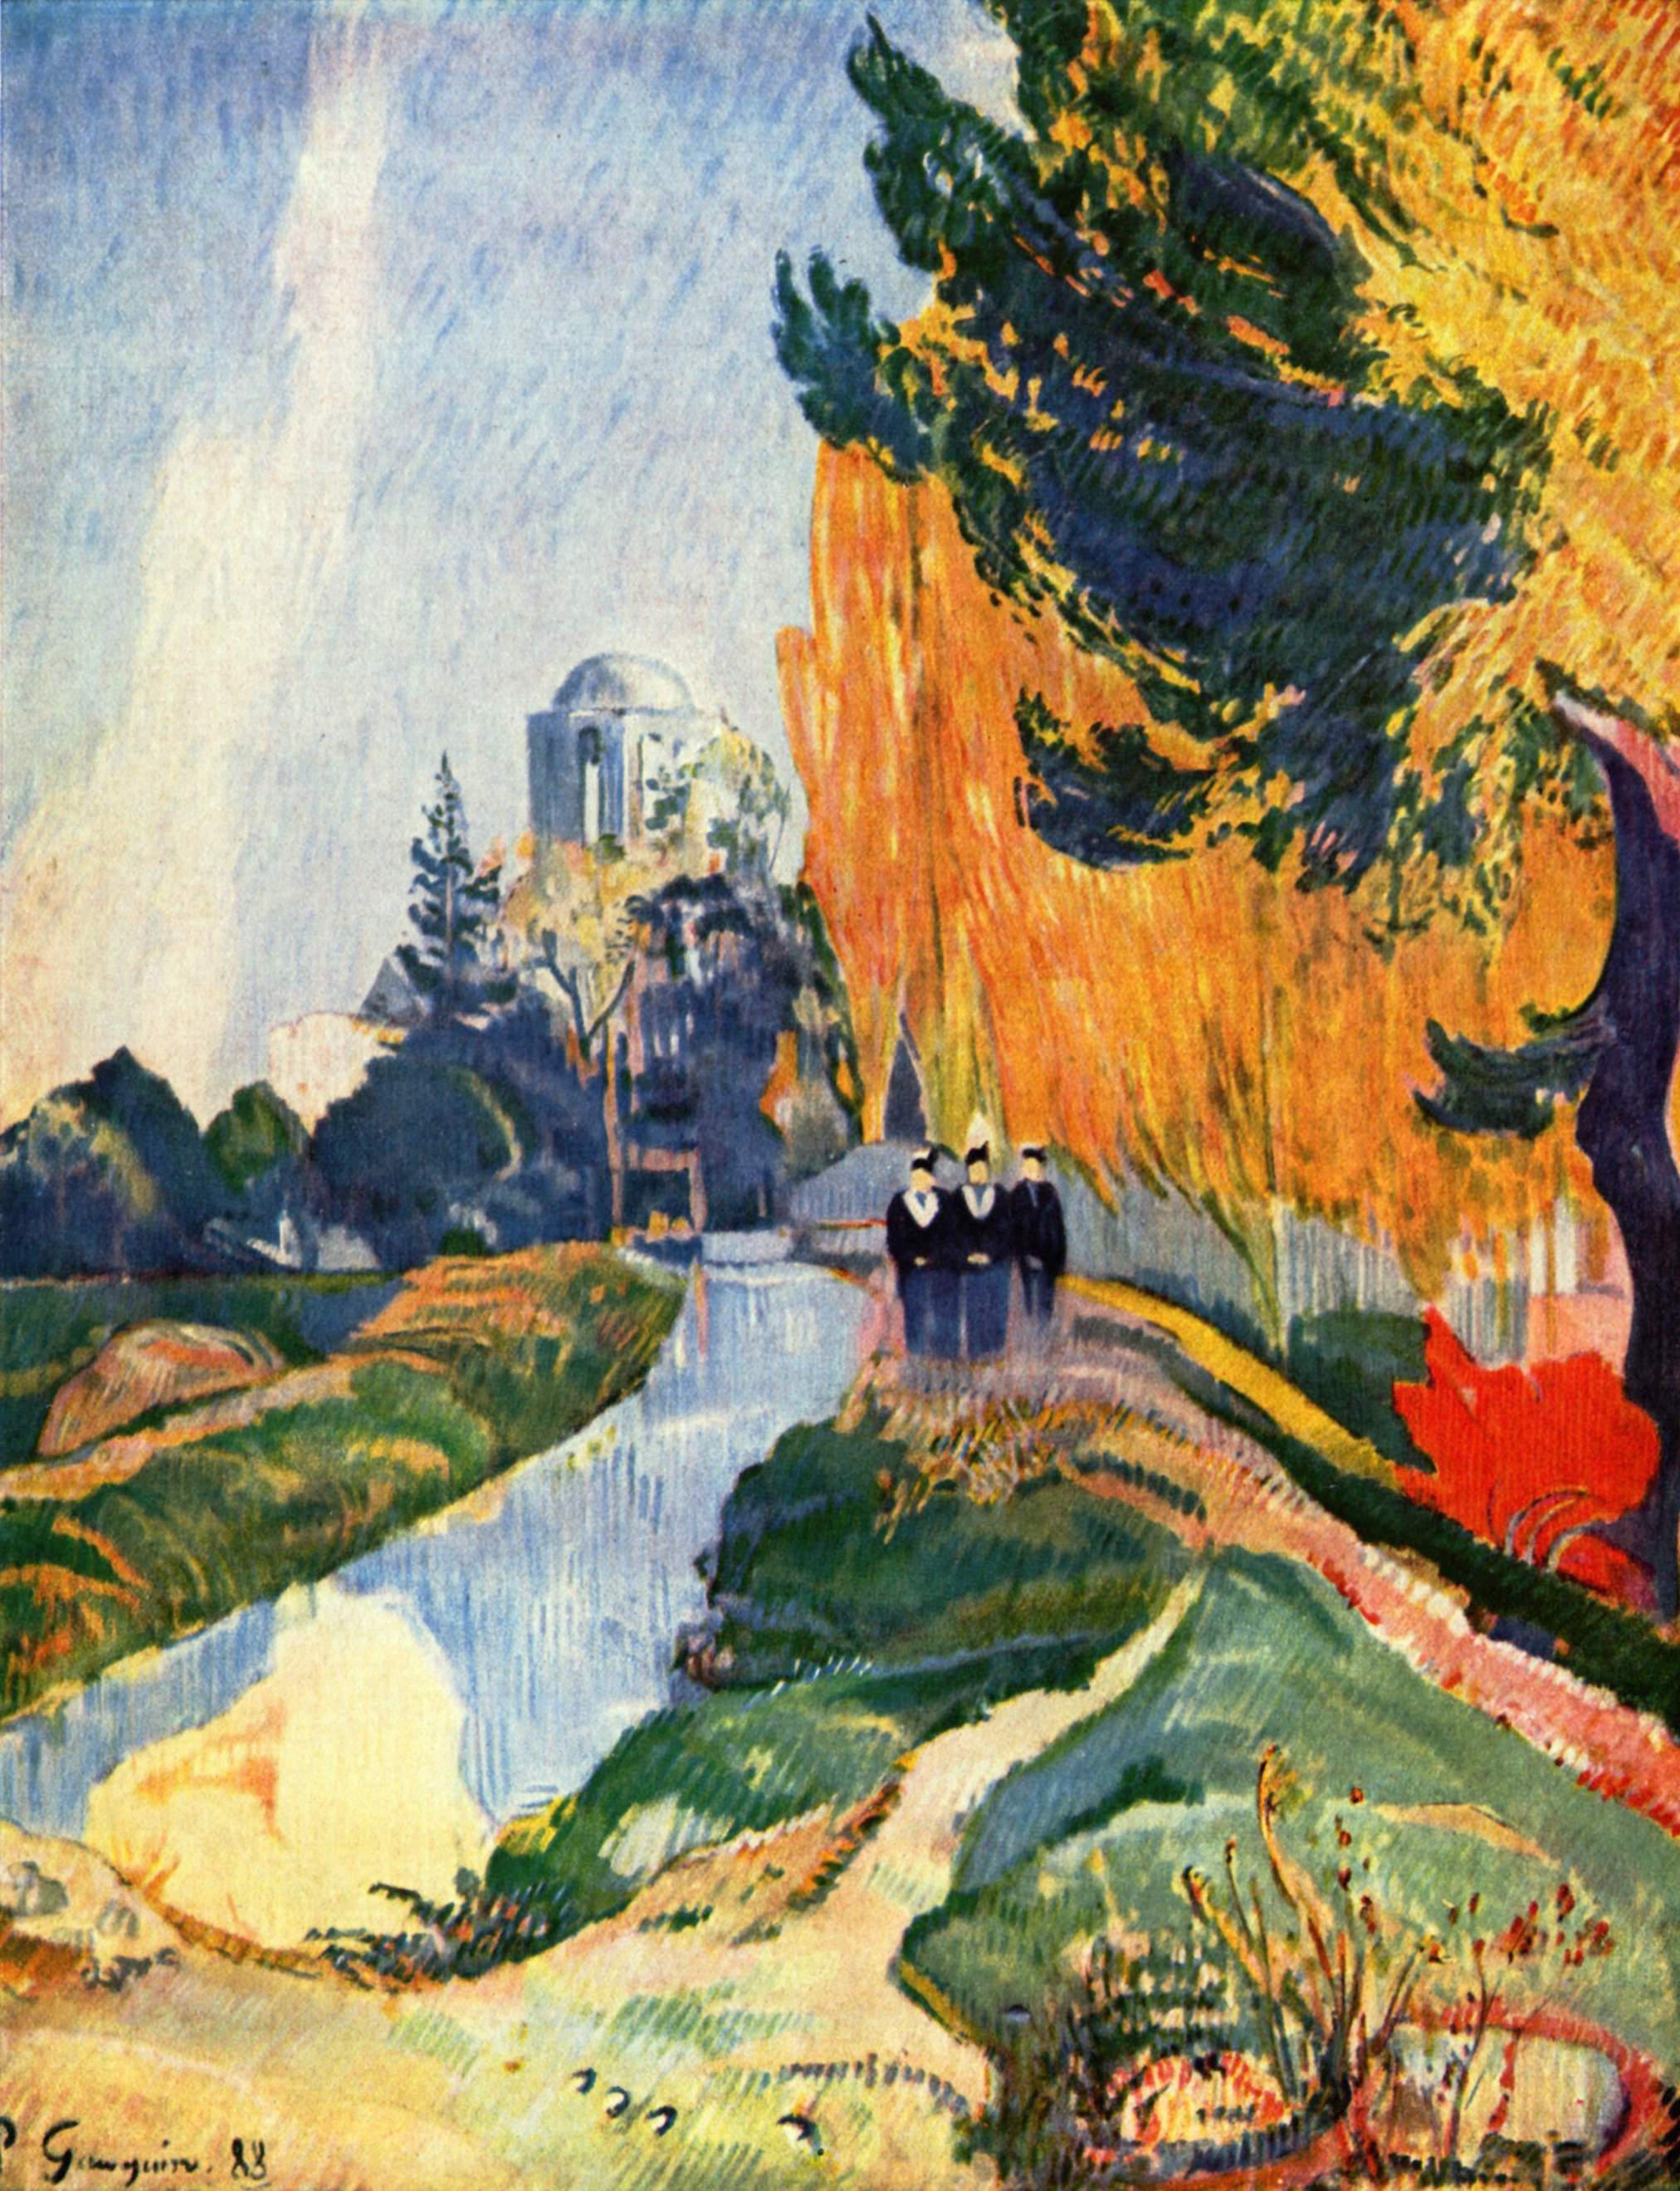 Les Alyscamps by Paul Gauguin - 1888 - 91,6 × 72,5 εκ. 